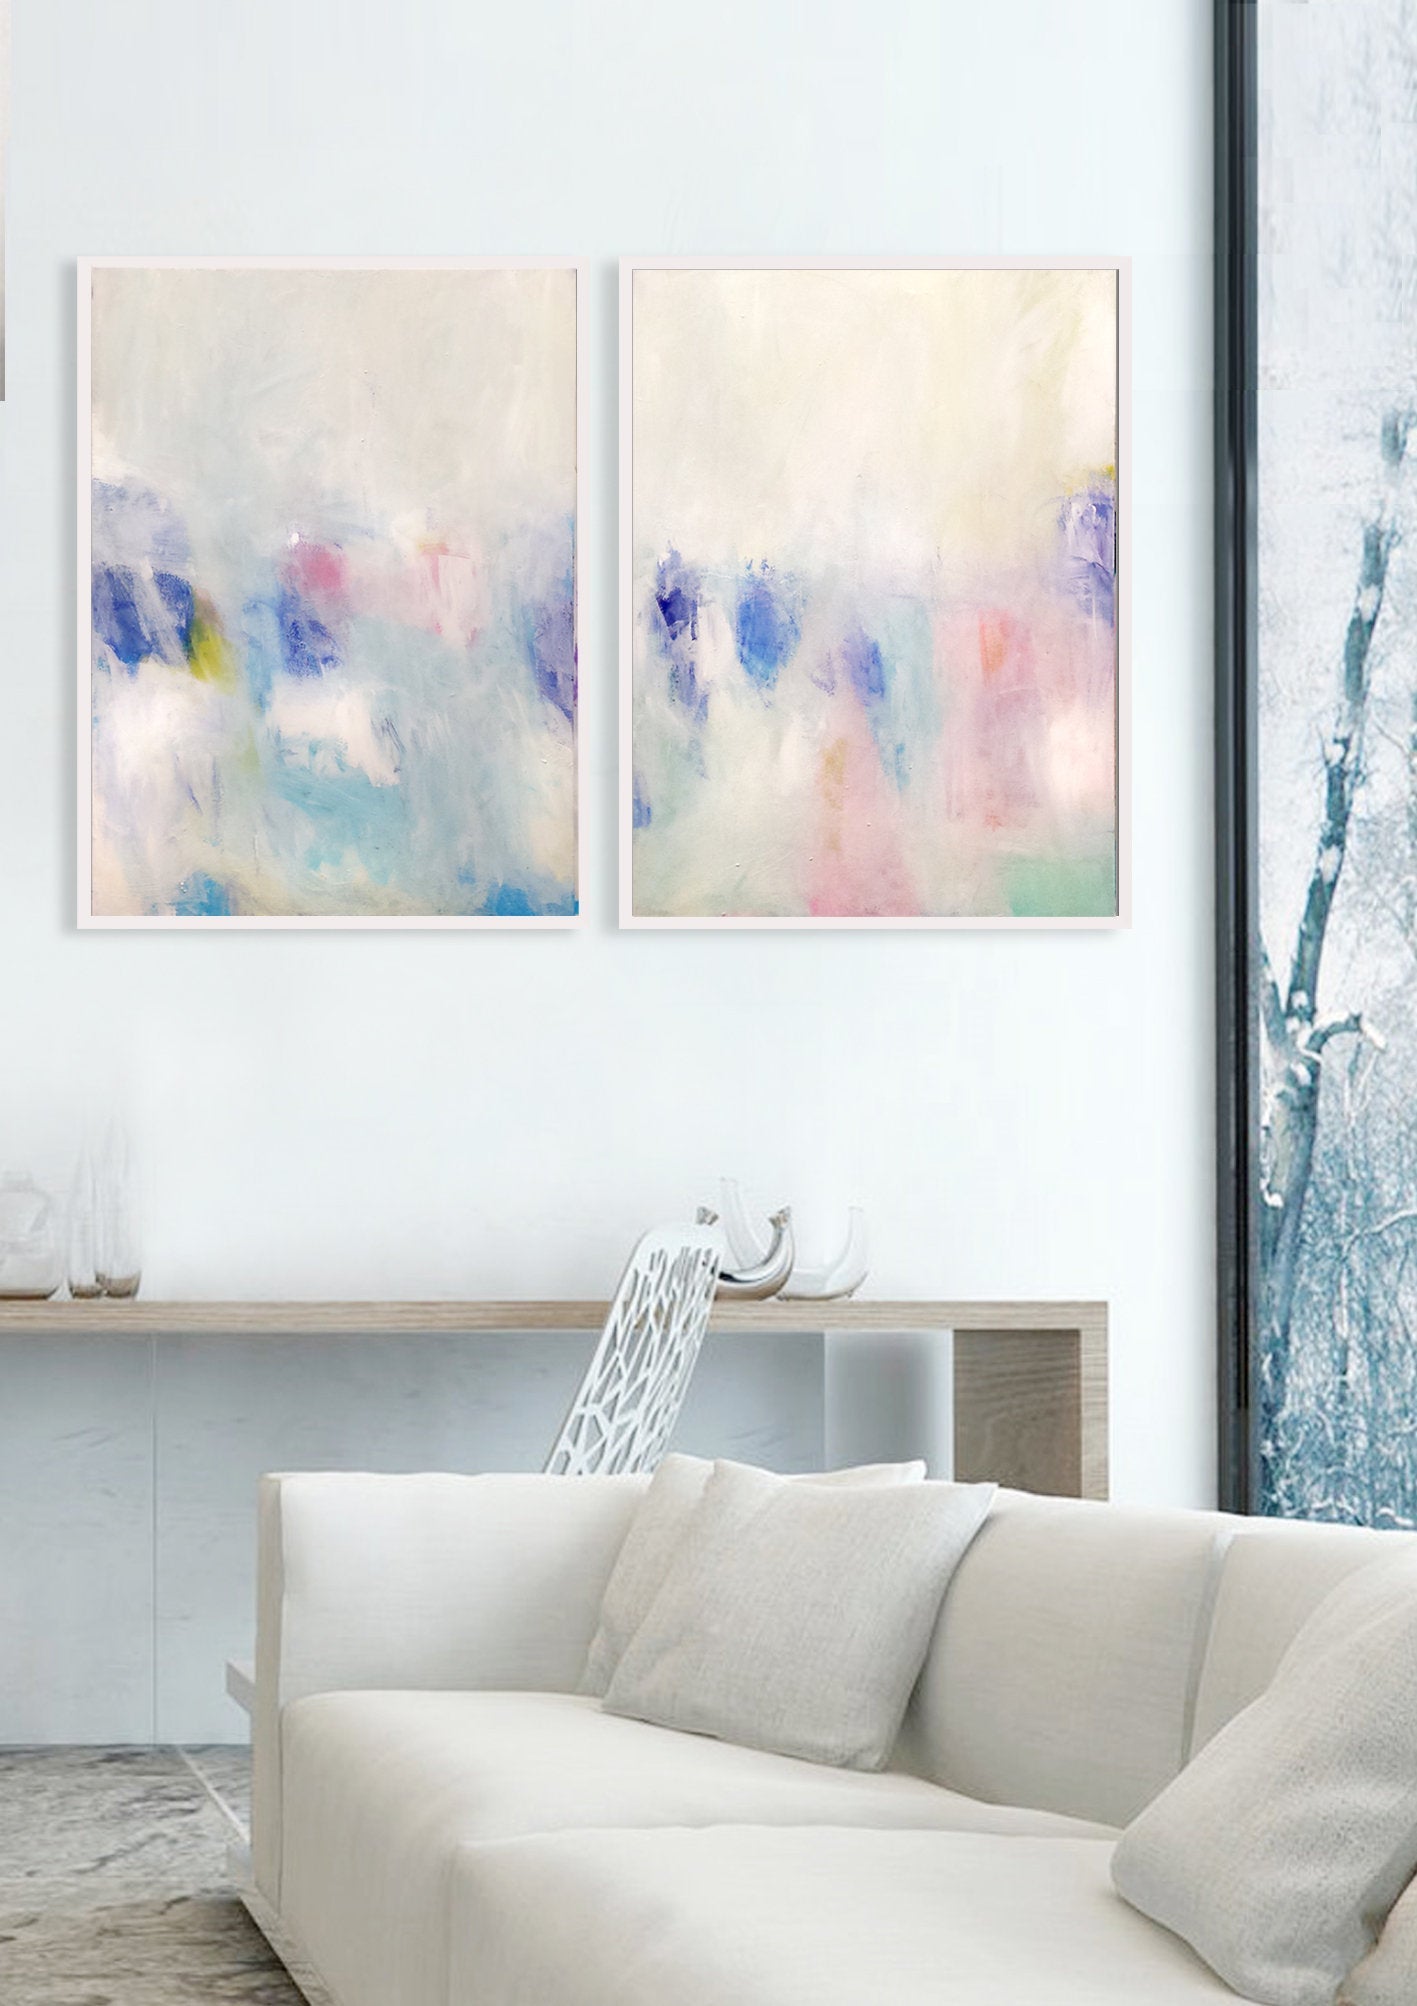 Set of 2 extra large prints, Abstract Acrylic Painting Giclee of Original Wall Art, abstract wall art, large abstract art, Camilo Mattis - camilomattis.com